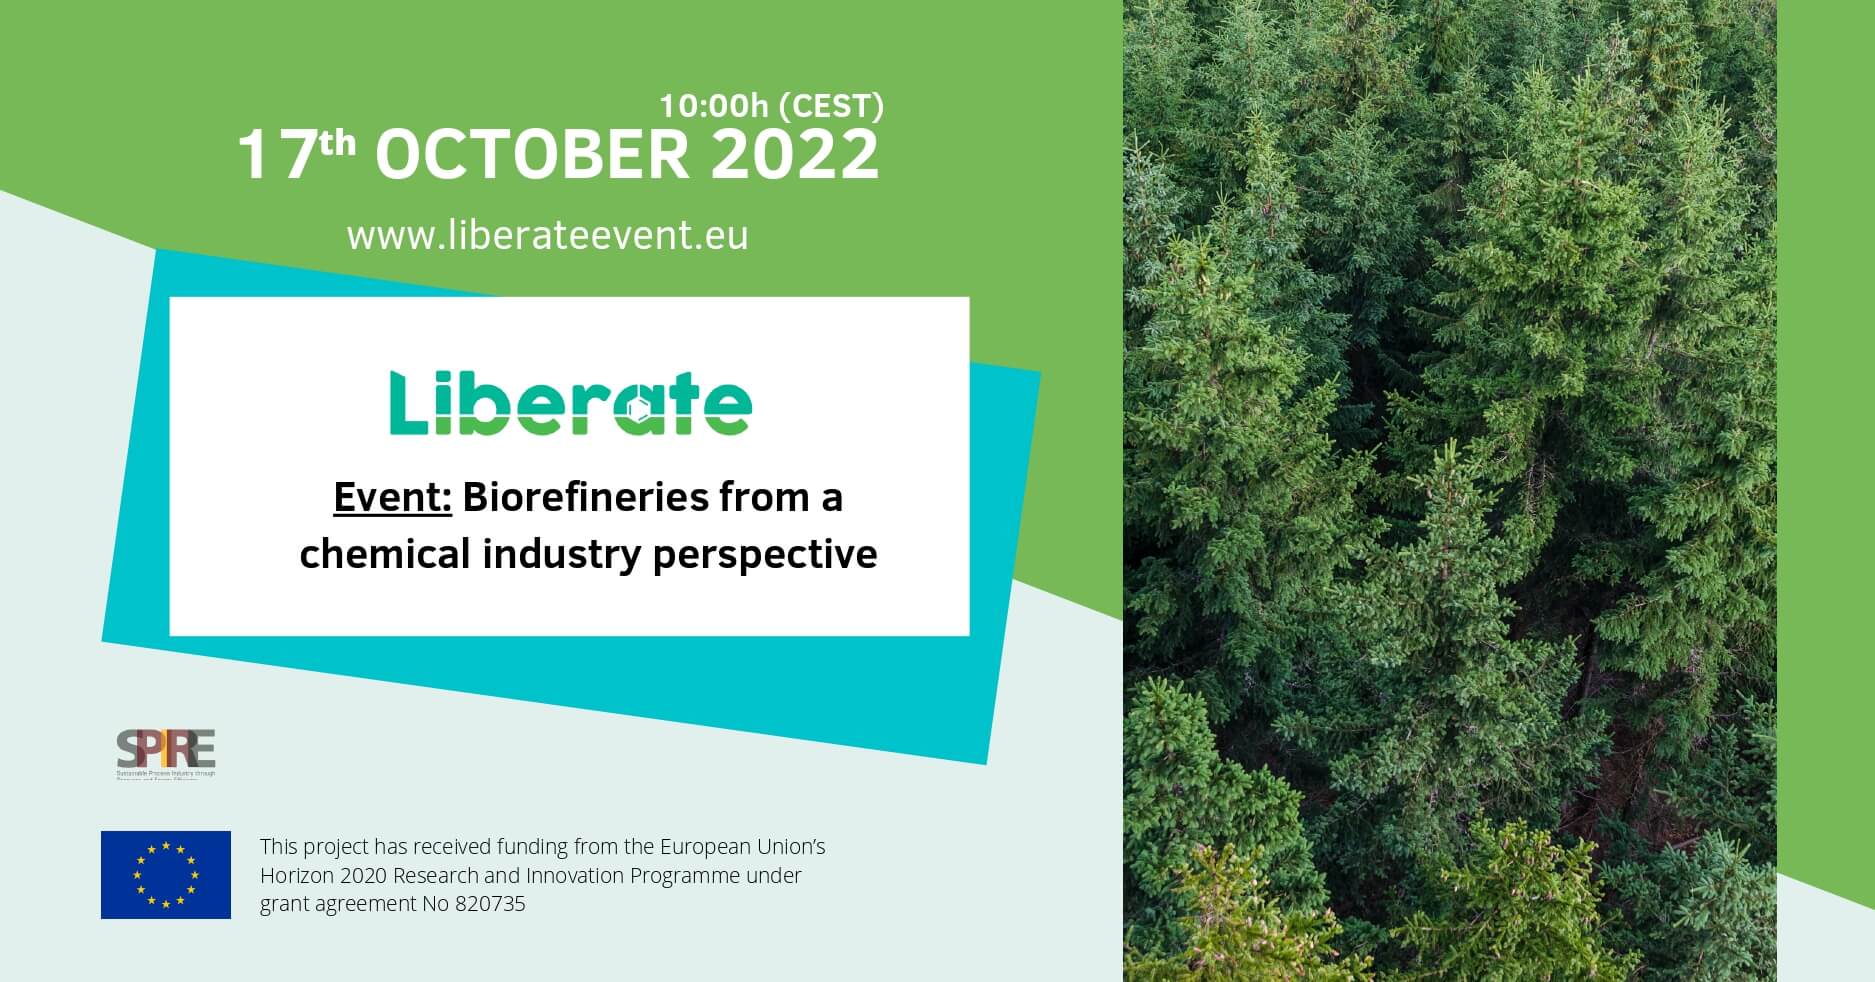 Dear Partners and colleagues, It is with great pleasure that from LIBERATE Project we would like to invite you to our last webinar titled: “Biorefineries from a chemical industry perspective” , on October 17, 2022. This Webinar is really important for LIBERATE as we are in the final phase of the project and we are pushing for future collaborations and dissemination, so we encourage all partners to send this invitation to all interested institutions as large companies, SMEs, RTOs, universities, etc… For registration: https://www.liberateevent.eu/ Summary: The LIBERATE initiative, a project under the European Commission Horizon 2020 SPIRE (Sustainable Process Industry through Resources) programme will held a webinar entitled “Biorefineries from a chemical industry perspective” on October 17, 2022. LIBERATE has developed a pilot plant for the conversion of low-cost lignin feedstock into high-value and sustainable chemicals as vanillin and mixed phenolic derivatives through an electrochemical process. The outputs of the pilot plant and other processes implemented at bench scale are being evaluated by five European chemical industries: Evonik, Oxiris, Chimar and Megara. In this webinar, these four chemical industries will review their activities in the replacement of fossil-based by bio-based chemicals Evonik is one of the world’s leading specialty chemicals companies. Oxiris is a leading manufacturer of antioxidants with a state of the art manufacturing facility. Chimar is an innovating SME that develops chemical technology, R&D and engineering services for the industrial production of adhesives and chemicals, primarily for the manufacture of wood-based and composite panels. Megara is a diversified manufacturer and supplier of raw materials for industrial and architectural coatings as well as rosin-based and other synthetic resins for the paint, adhesive, paper and construction industry.